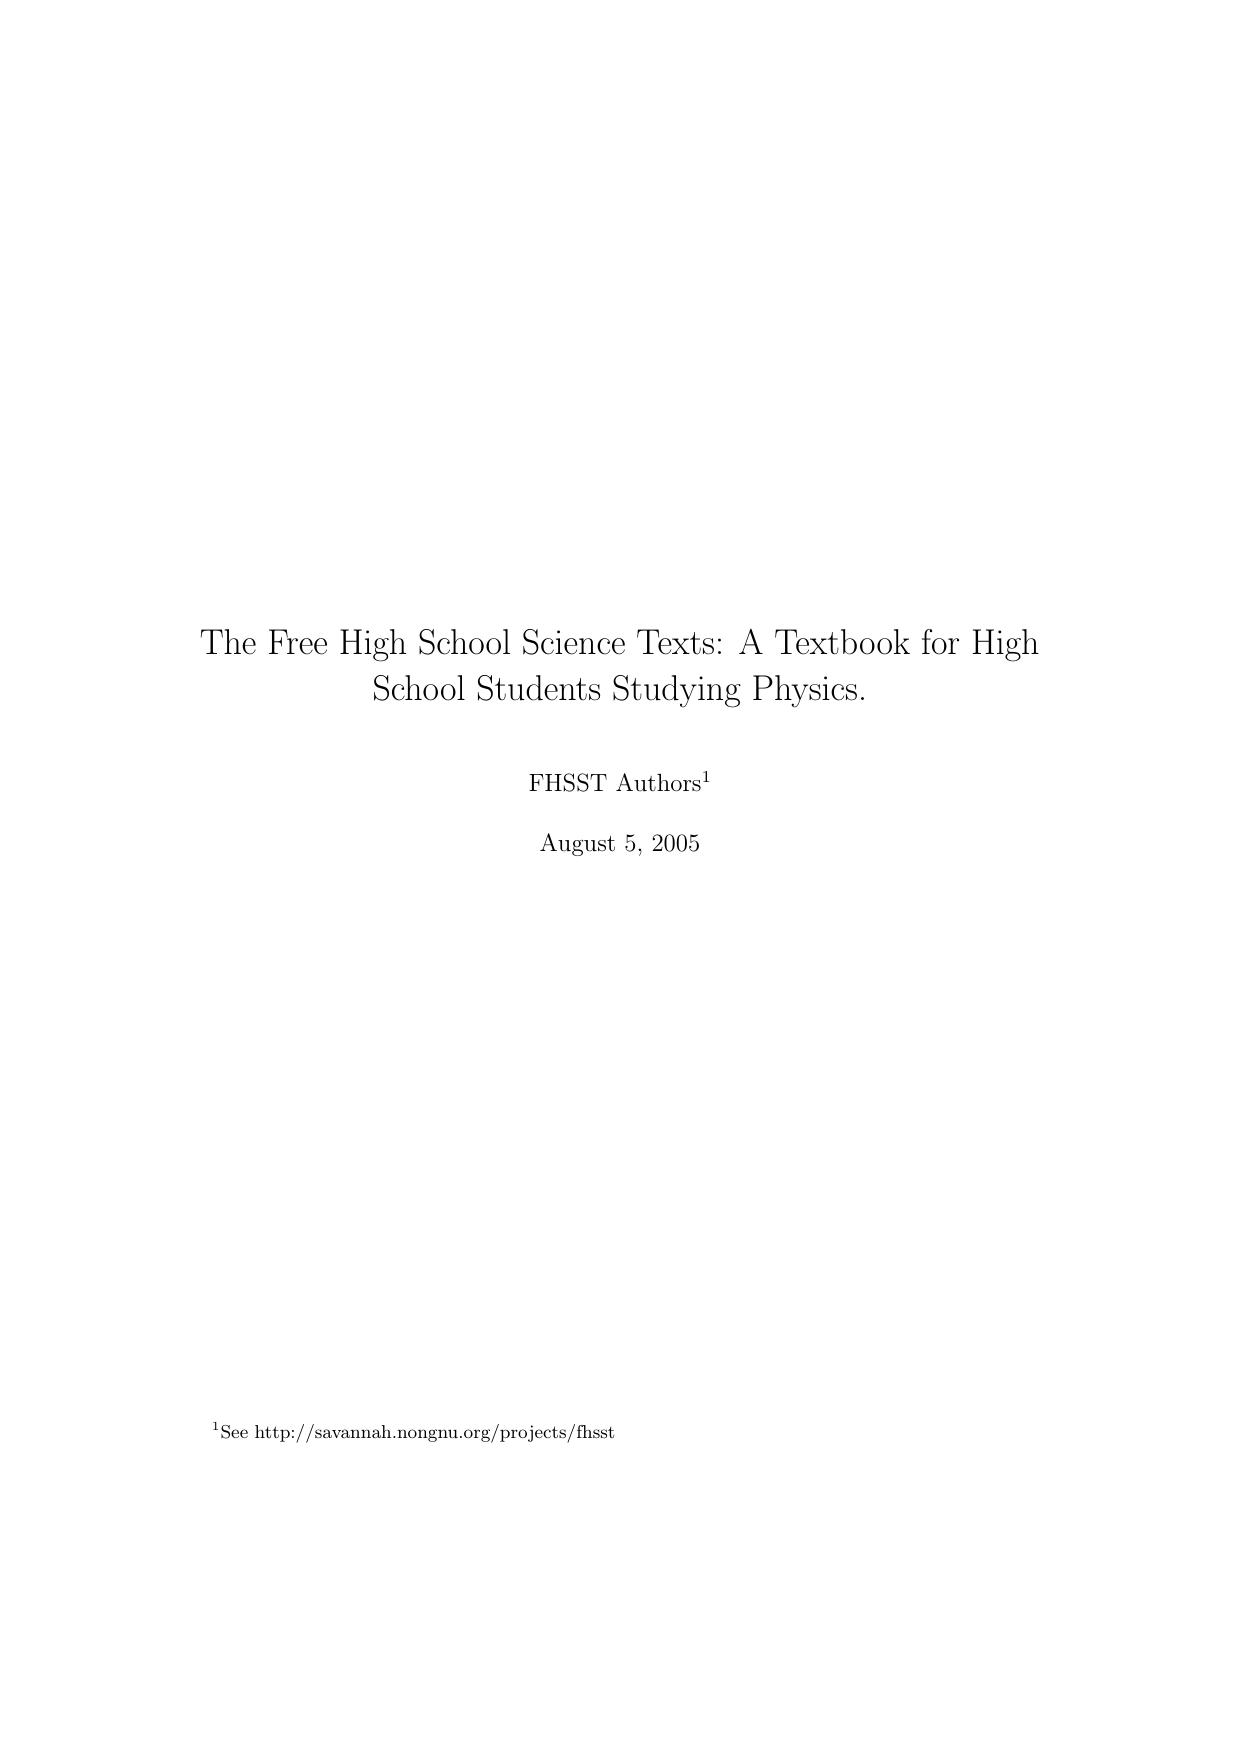 The Free High School Science Texts: A Textbook for High School Students Studying Physics.